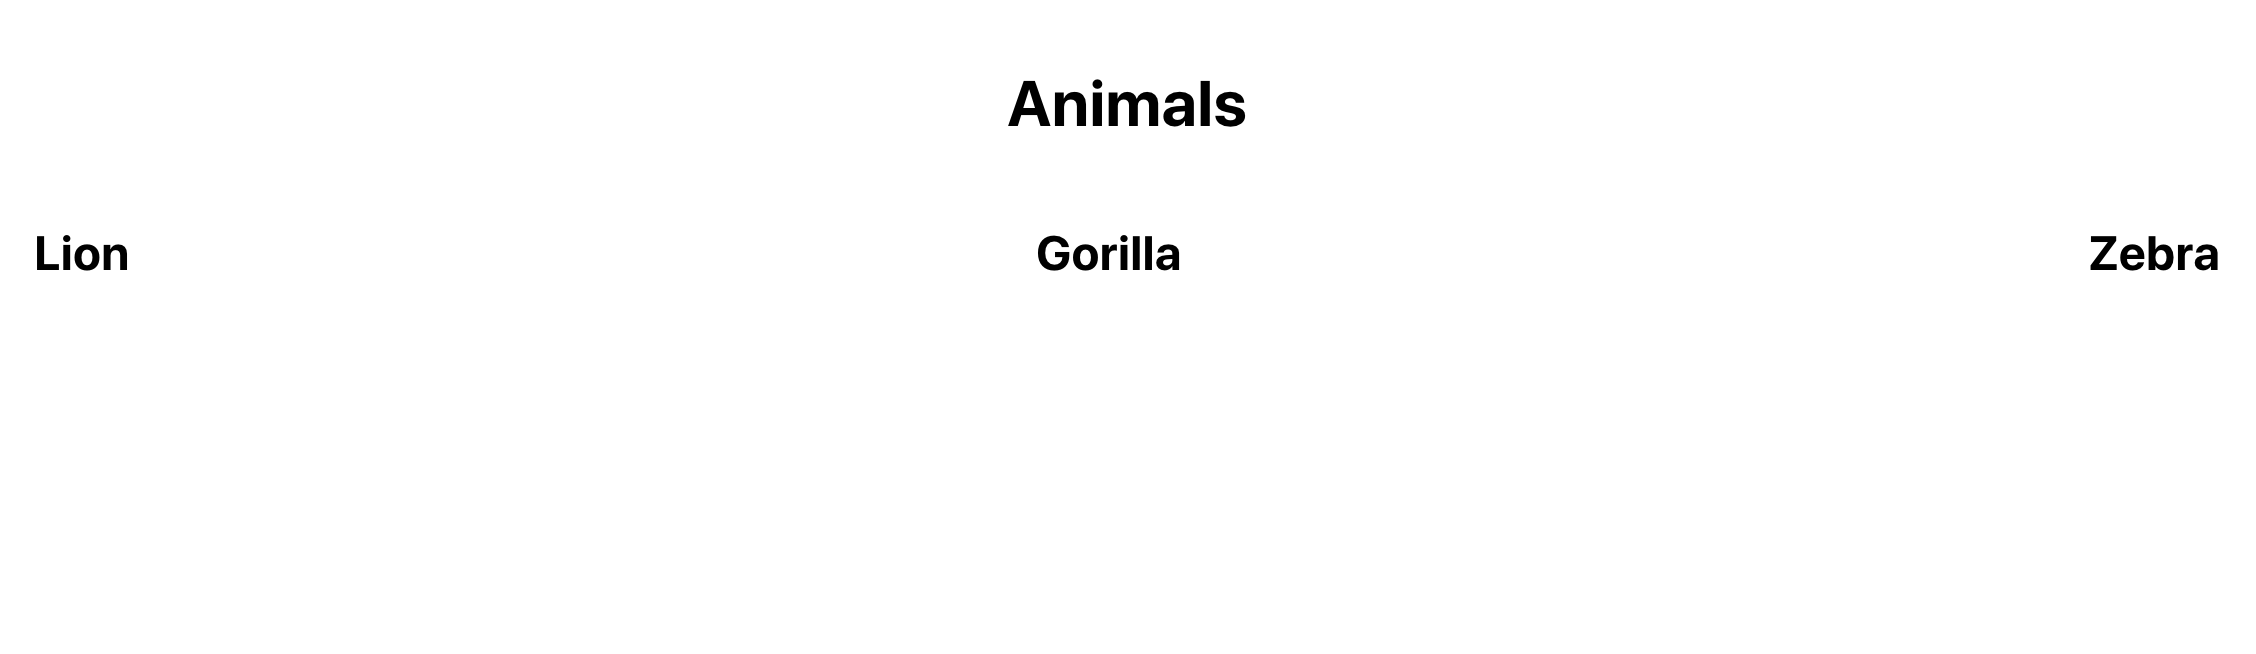 React projects with animal names rendered